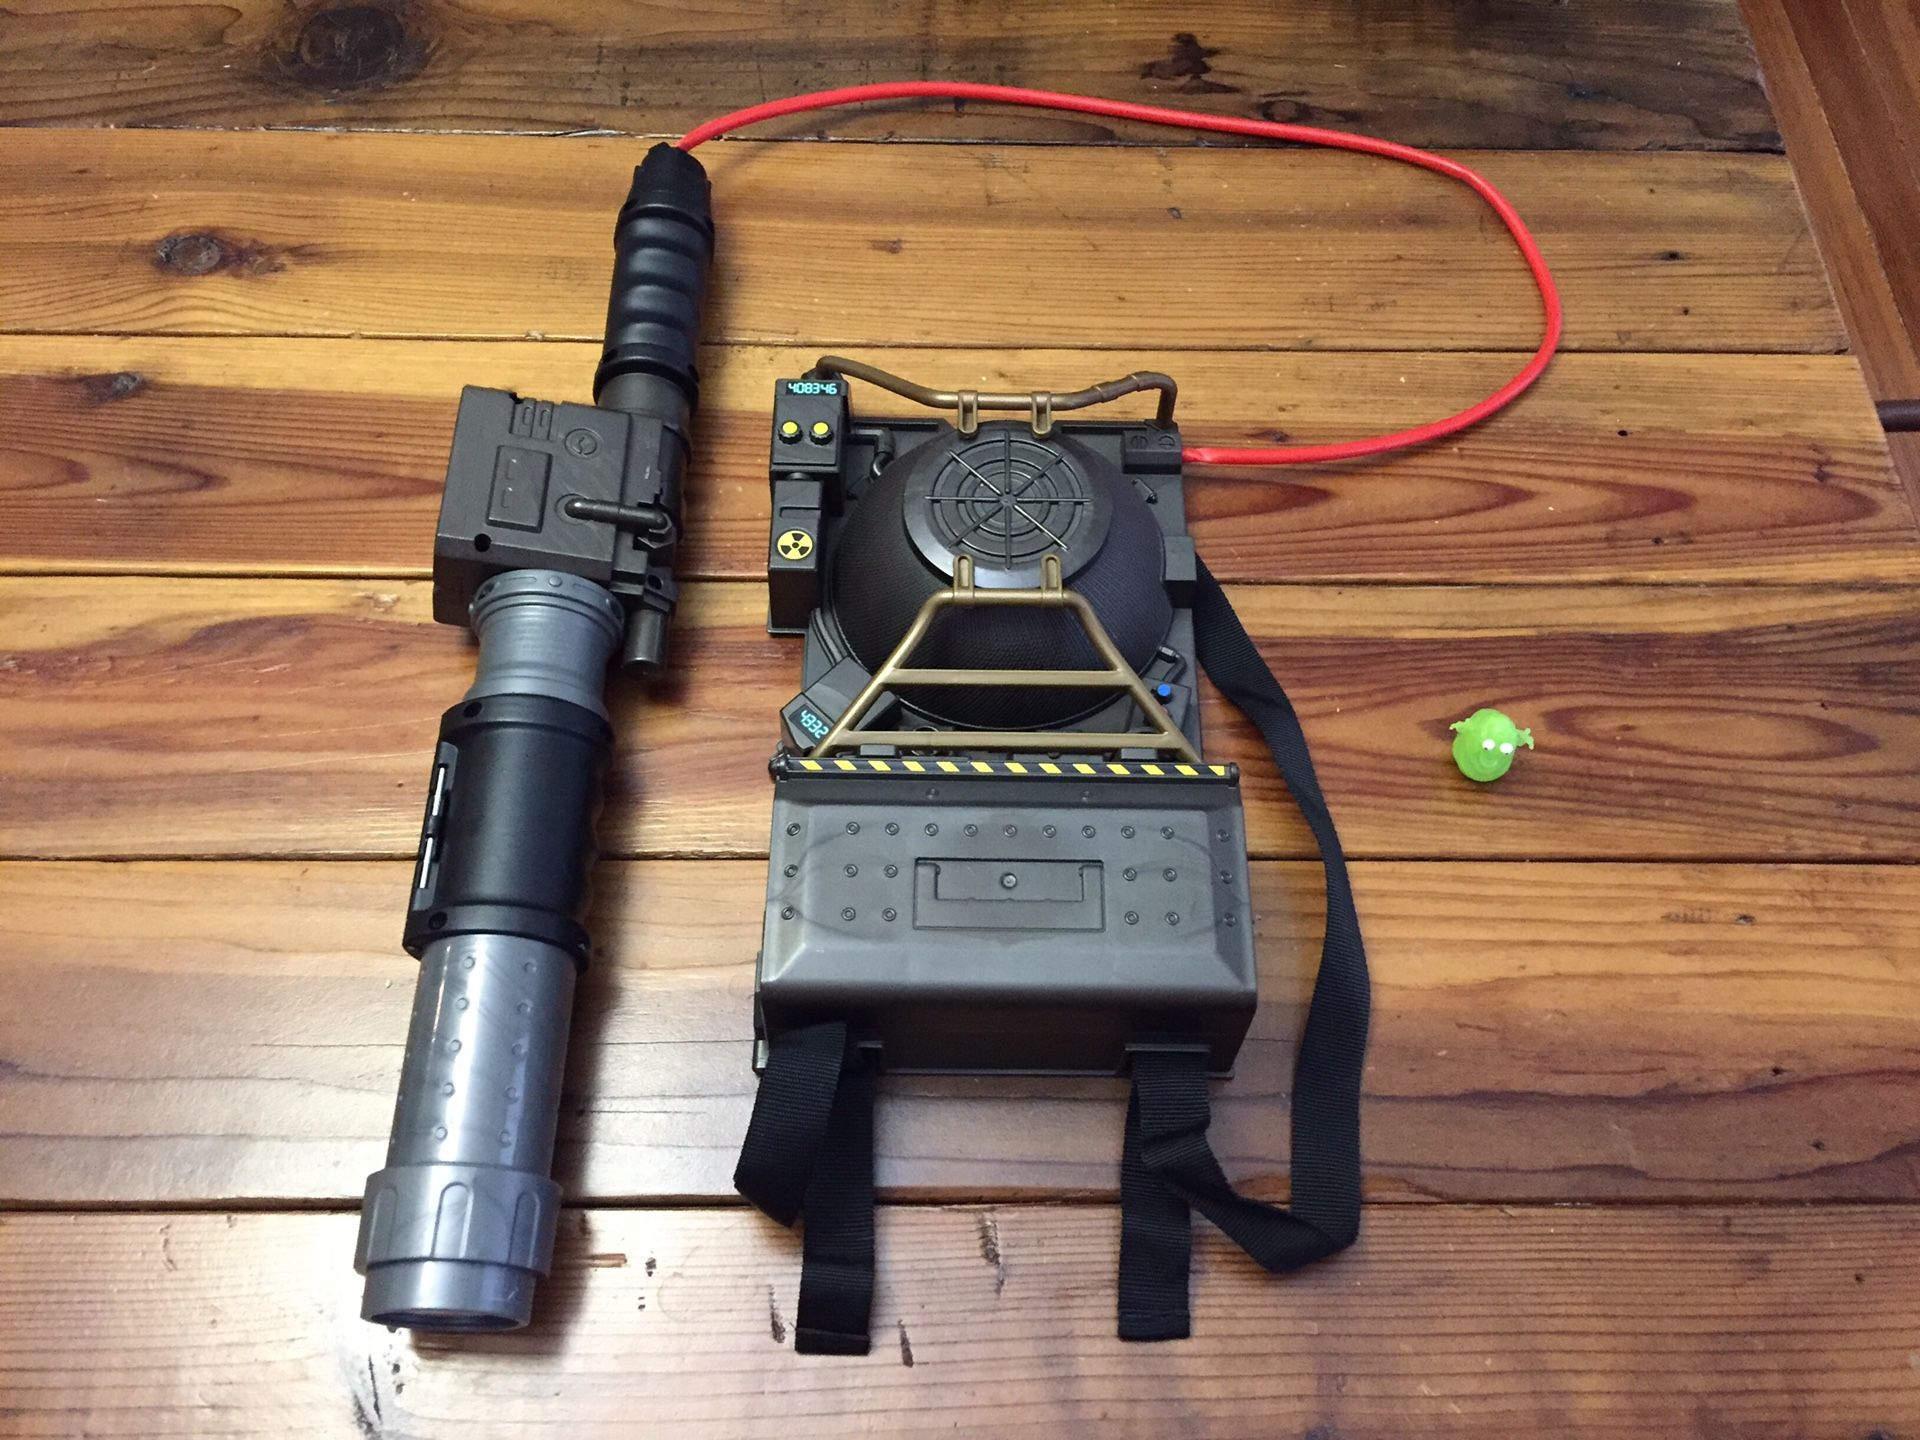 Ghostbusters electronic proton pack - 2016 Mattel cosplay Halloween